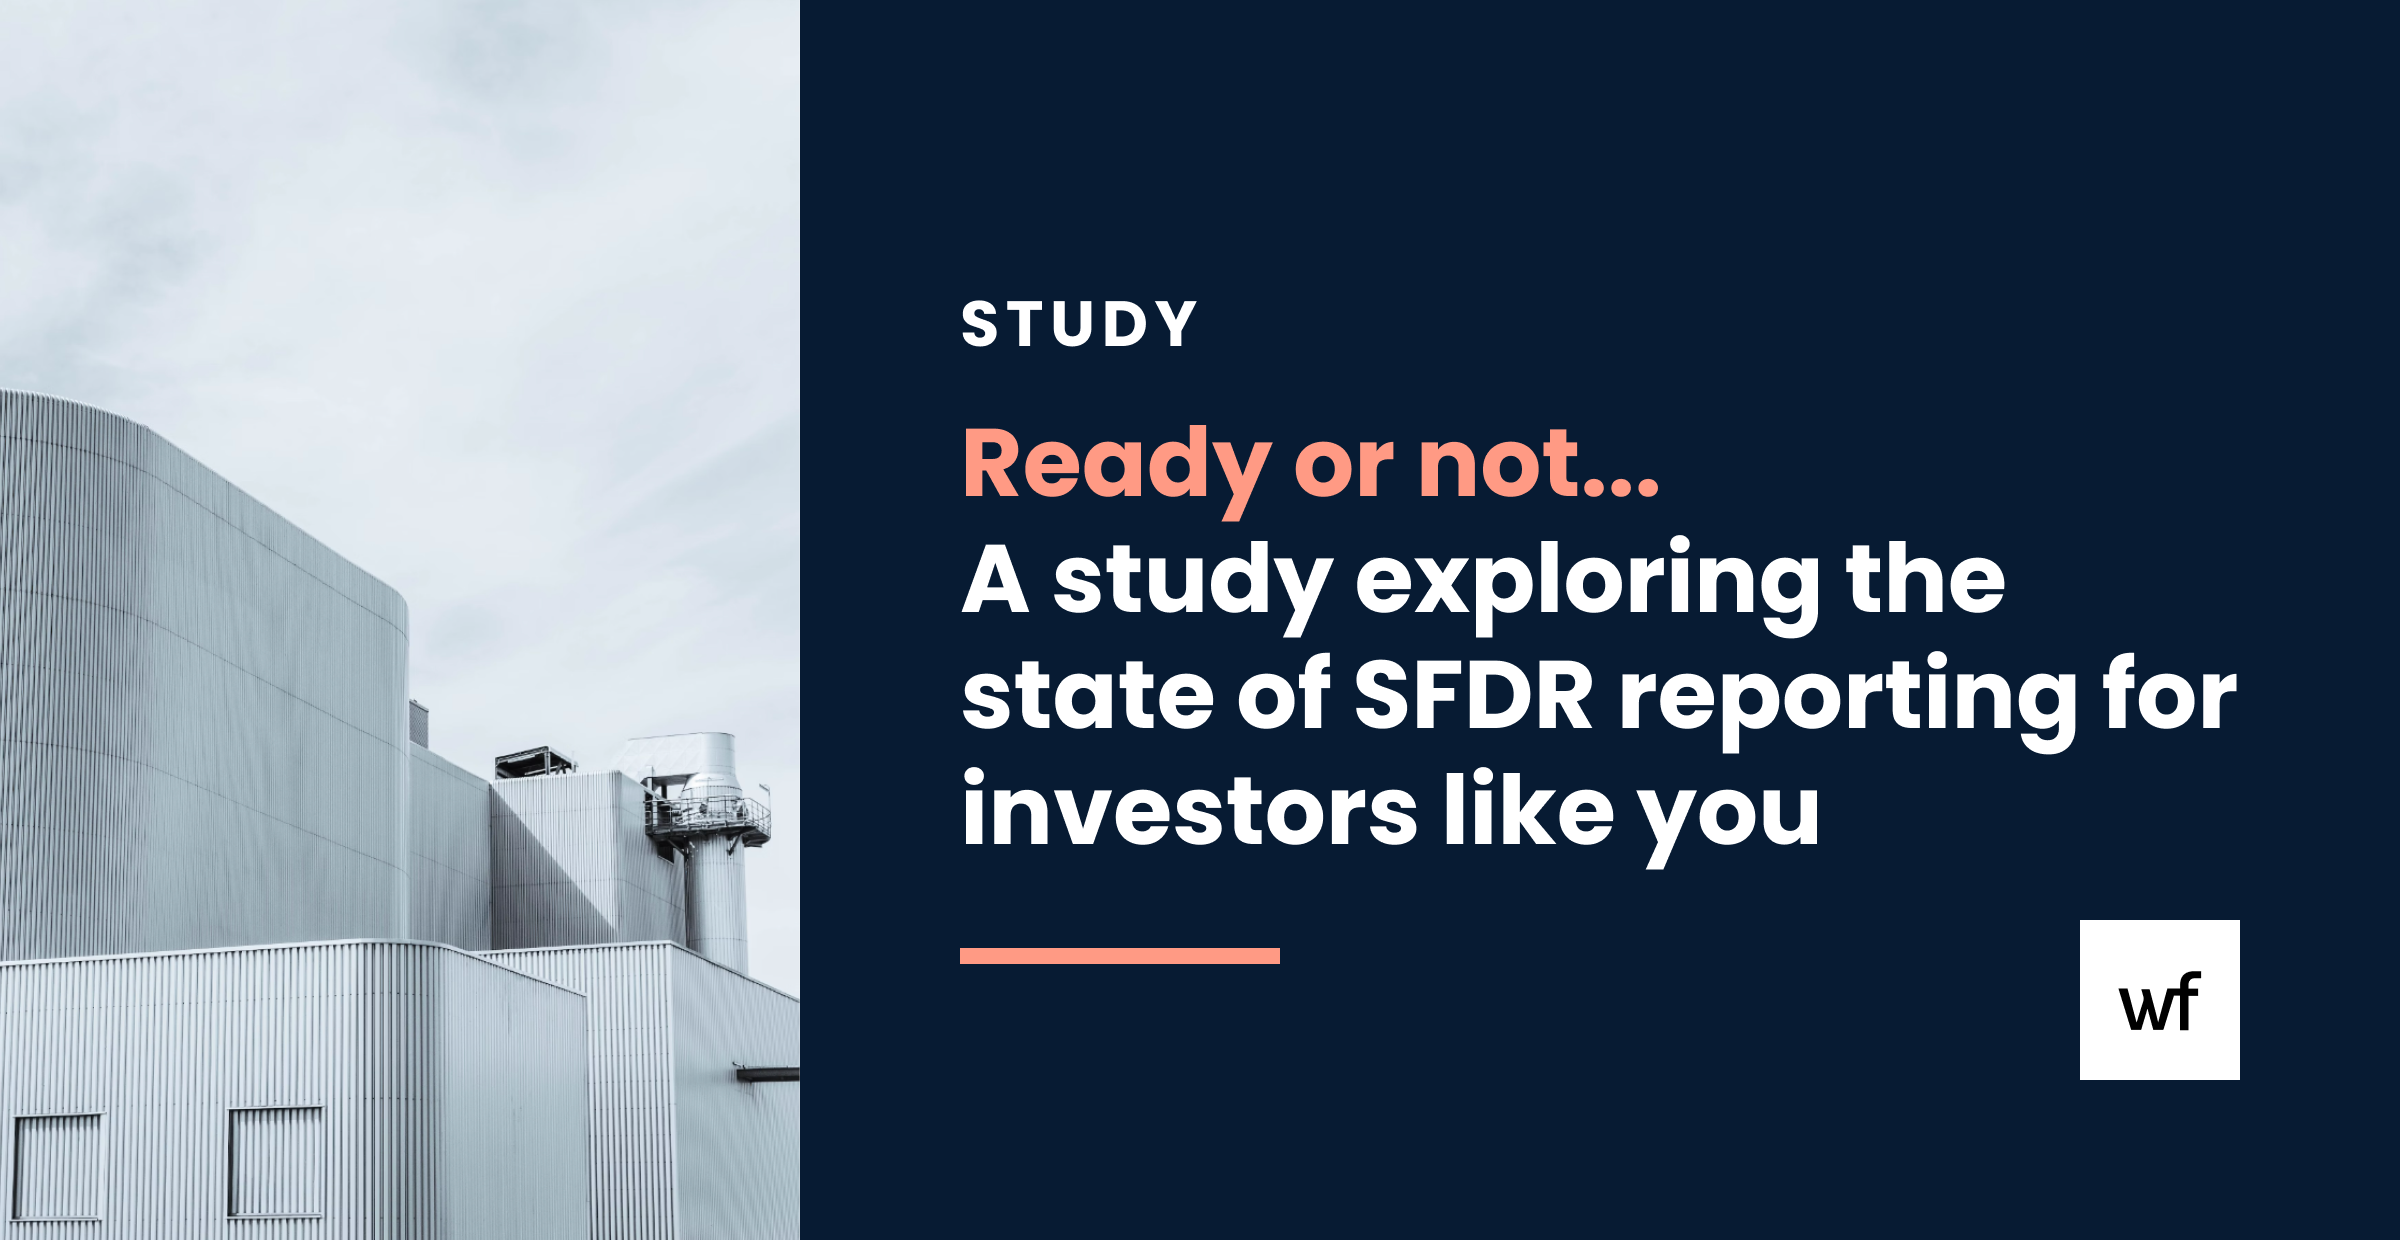 Worldfavor is releasing a study exploring the state of SFDR reporting for investors